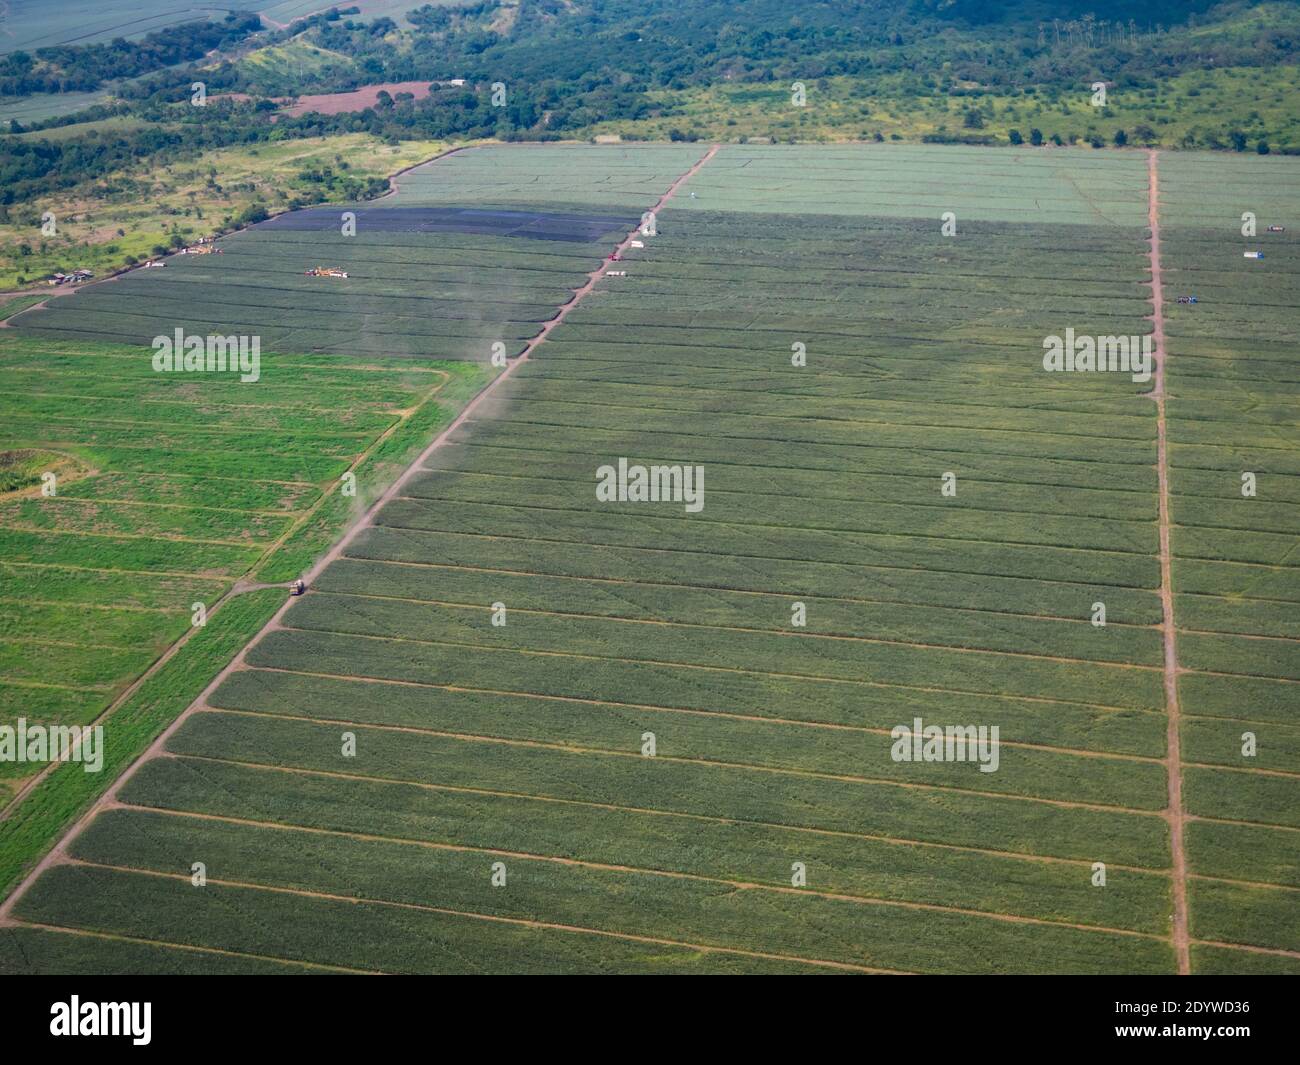 Aerial view of pineapple plantation near General Santos City in South Cotabato, Mindanao on the Philippines Stock Photo